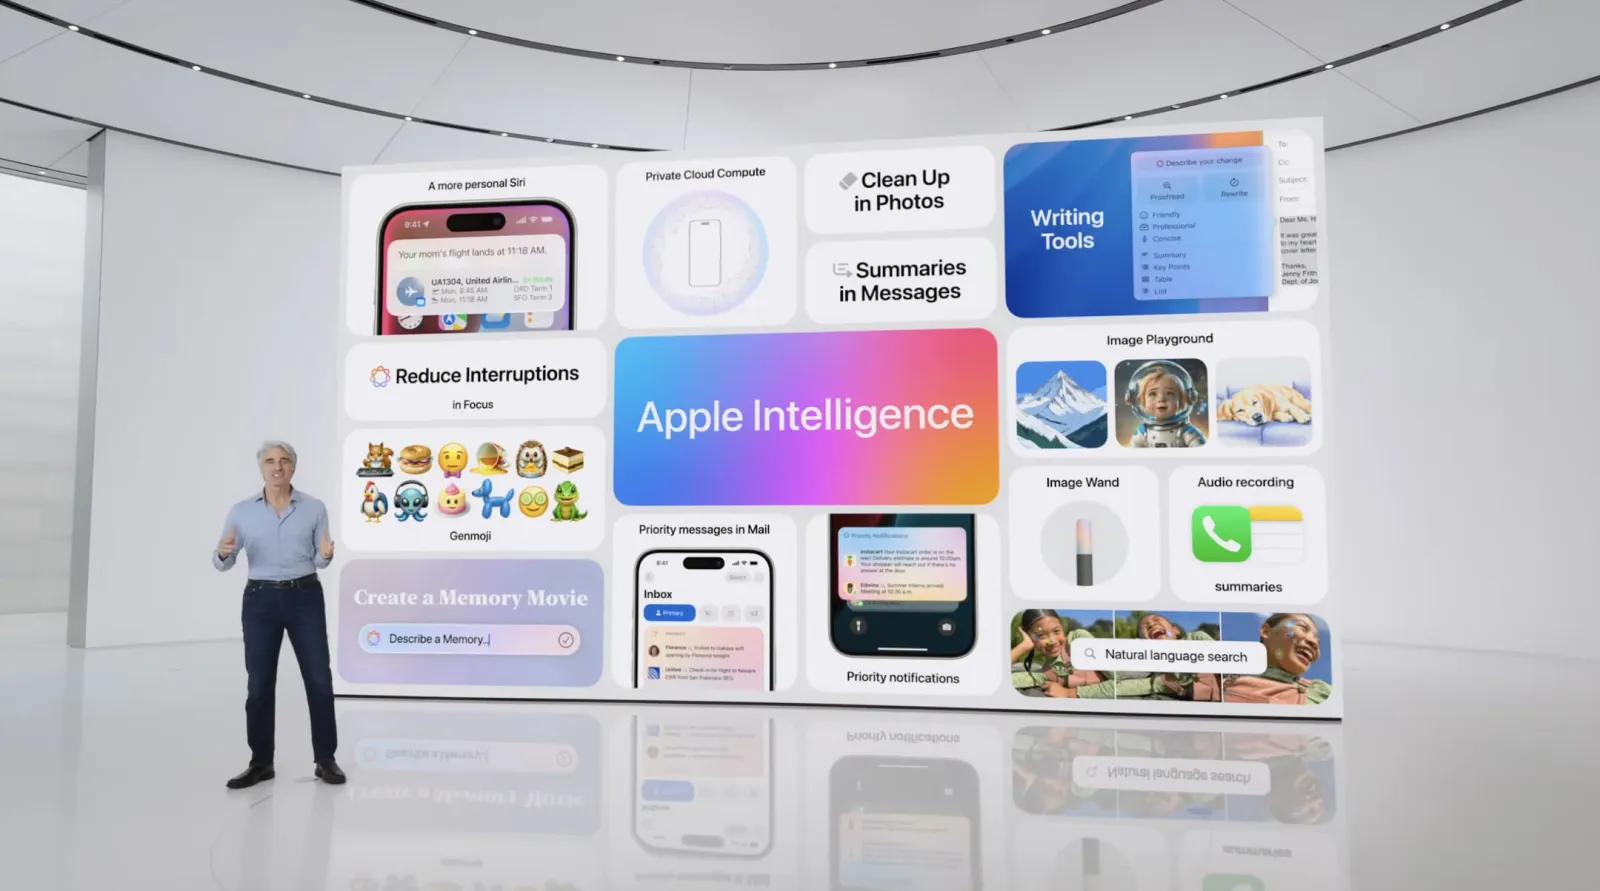 Apple prioritizes privacy with secure on-device AI processing